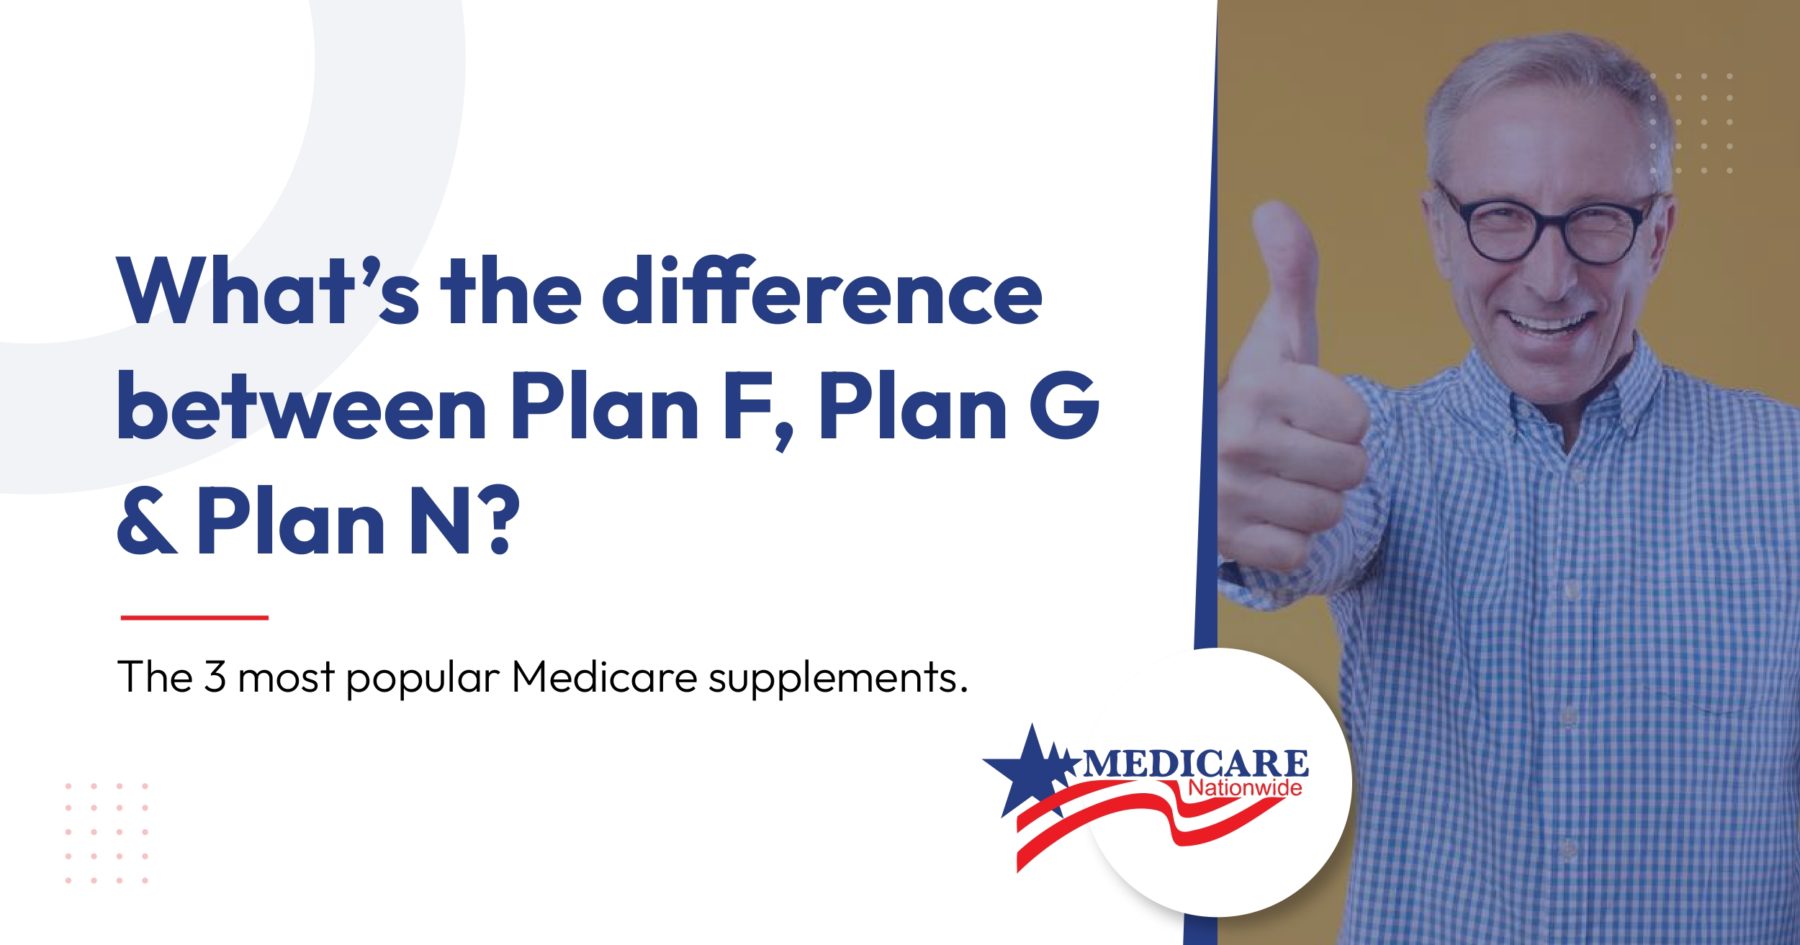 What's the difference between Plan F, Plan G and Plan N?